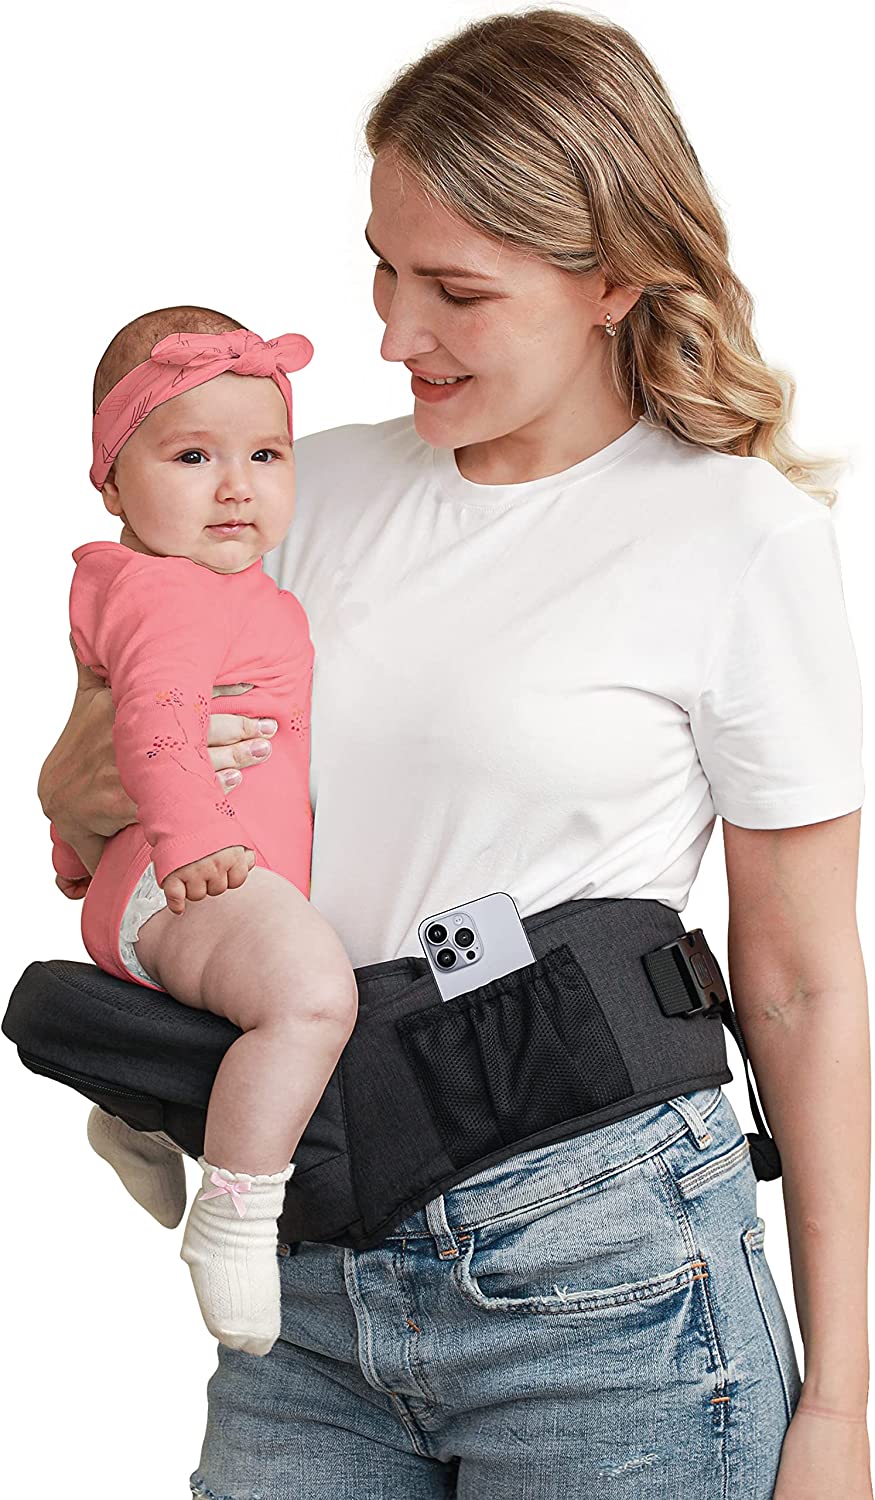 BABYMUST Hip Seat Baby Carrier, Advanced Adjustable Waistband &Various Pockets, Ergonomic Carrier for Newborns to Toddlers up to 66lbs, Black